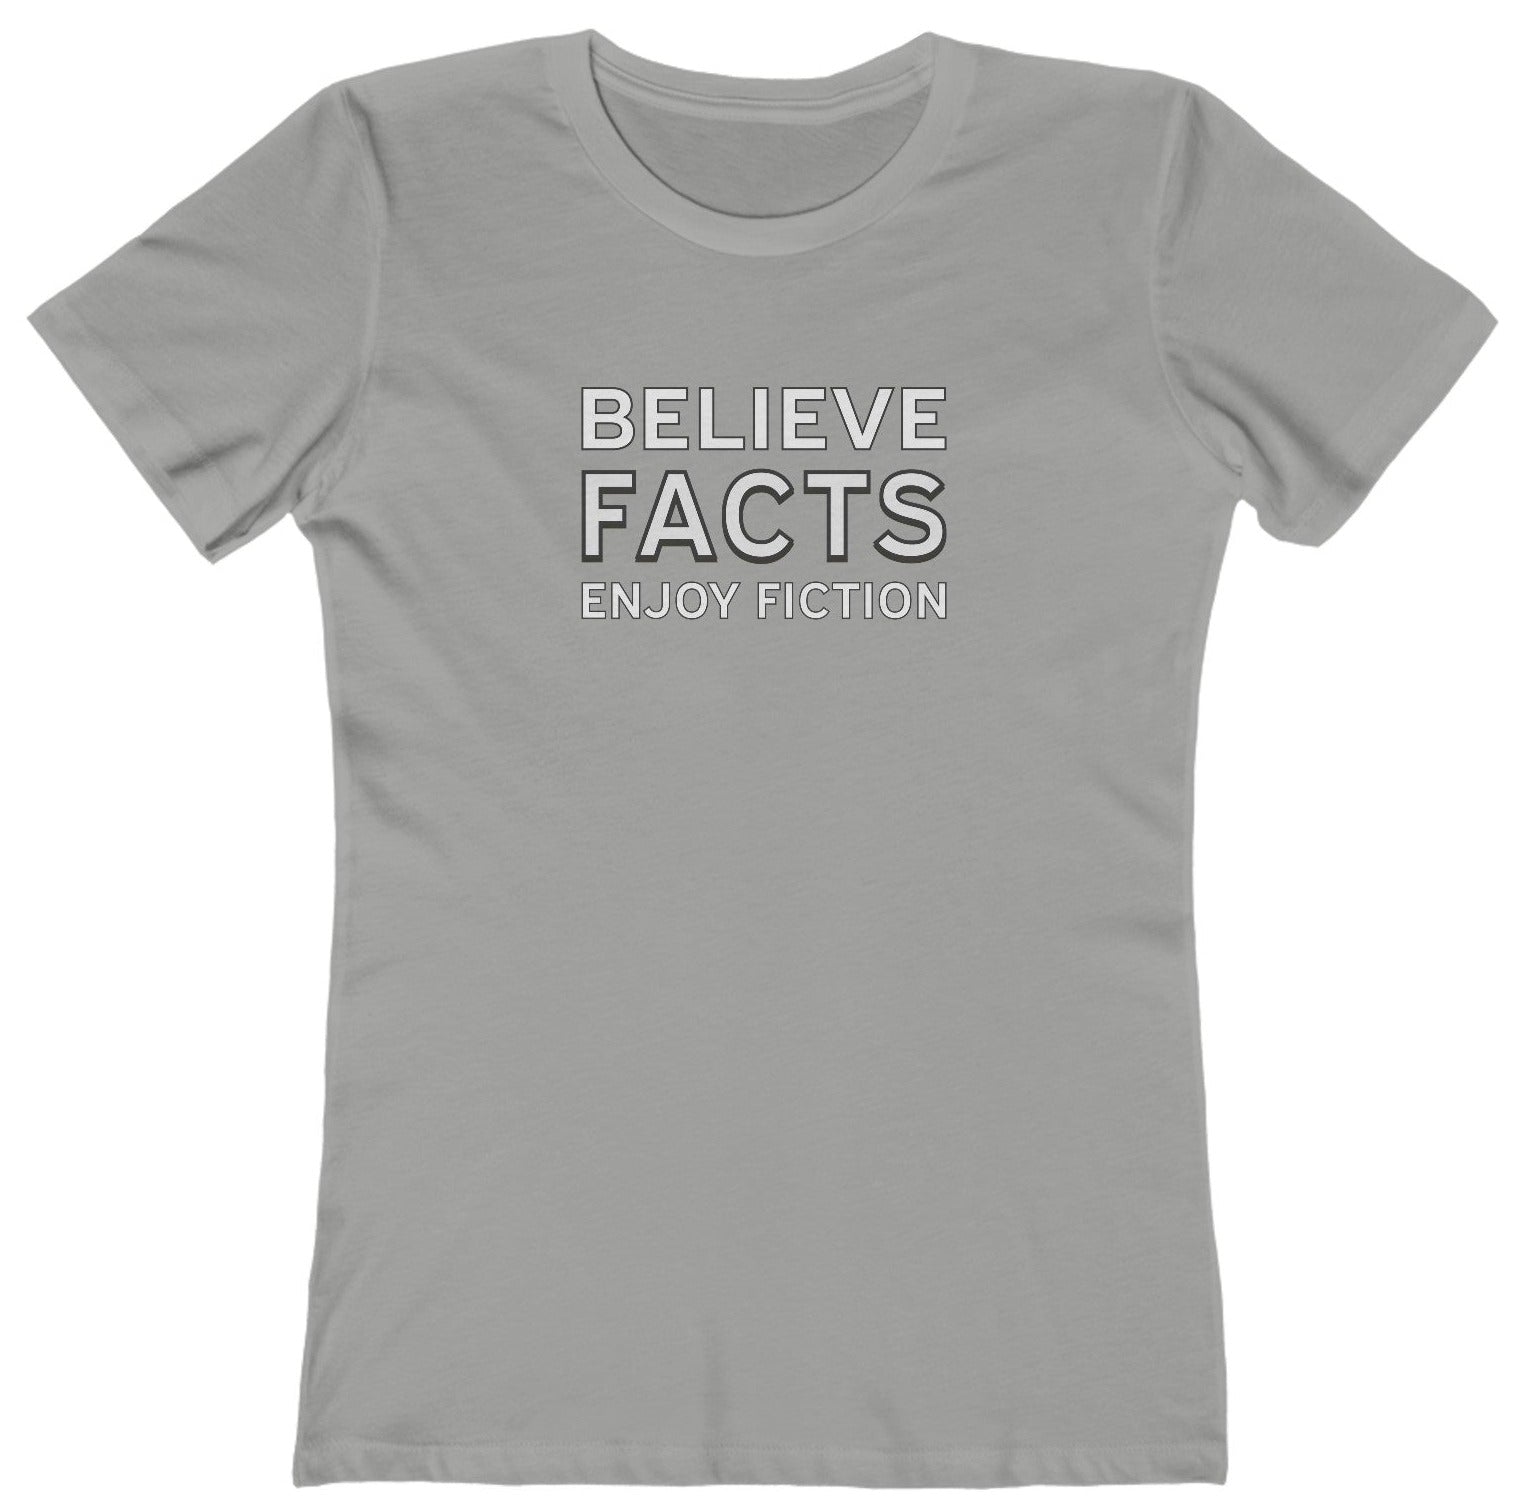 Facts and fiction t shirt